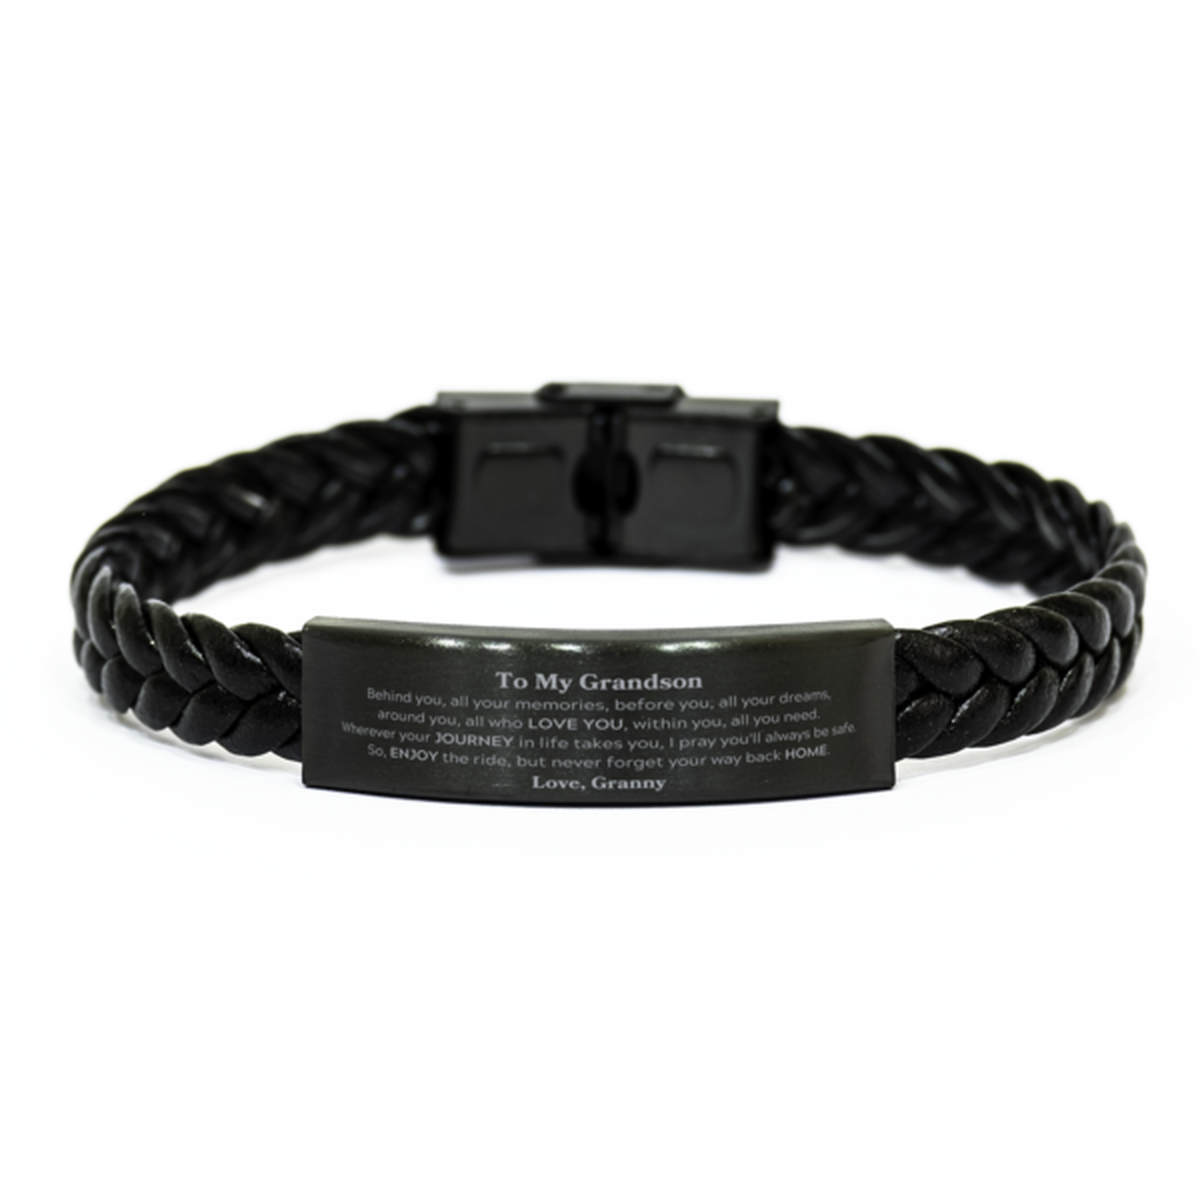 To My Grandson Graduation Gifts from Granny, Grandson Braided Leather Bracelet Christmas Birthday Gifts for Grandson Behind you, all your memories, before you, all your dreams. Love, Granny